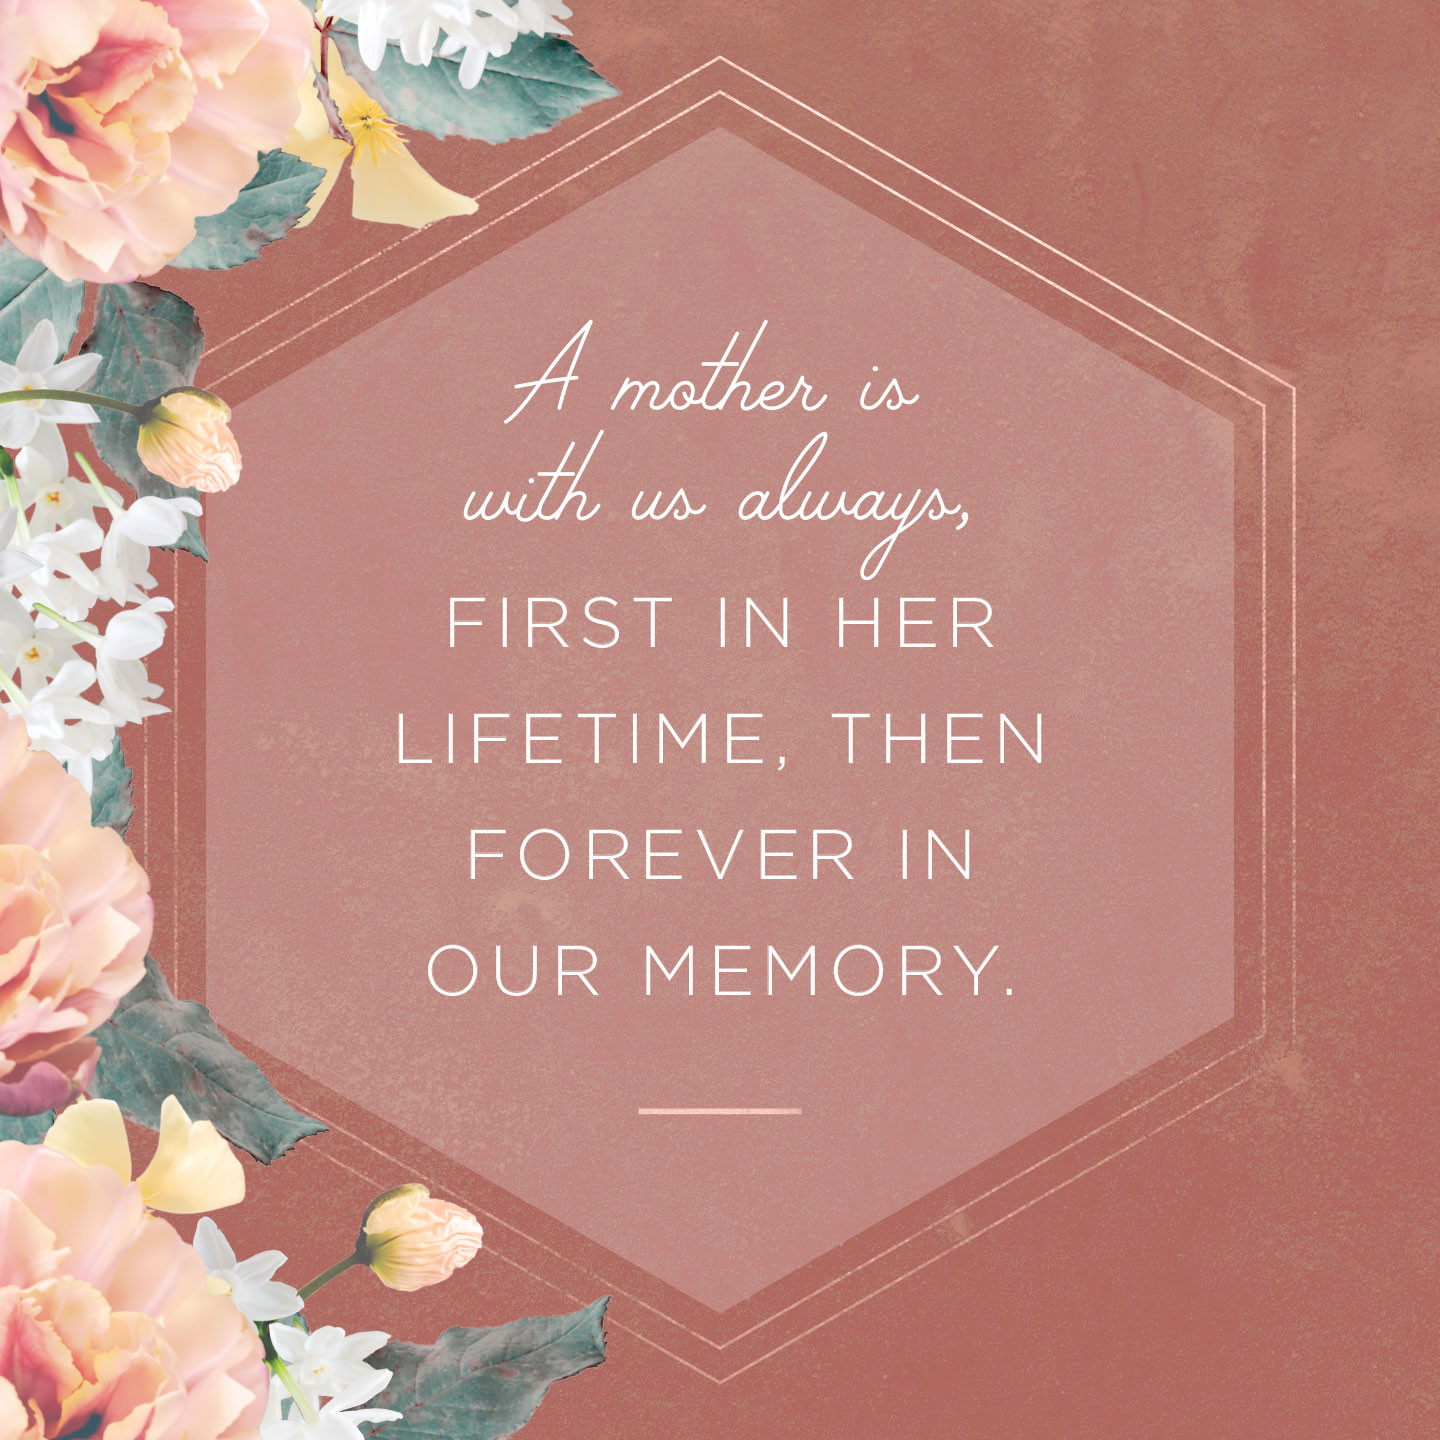 Loss Of A Baby Sympathy Quotes
 36 Sympathy Messages What to Write in a Condolence Card